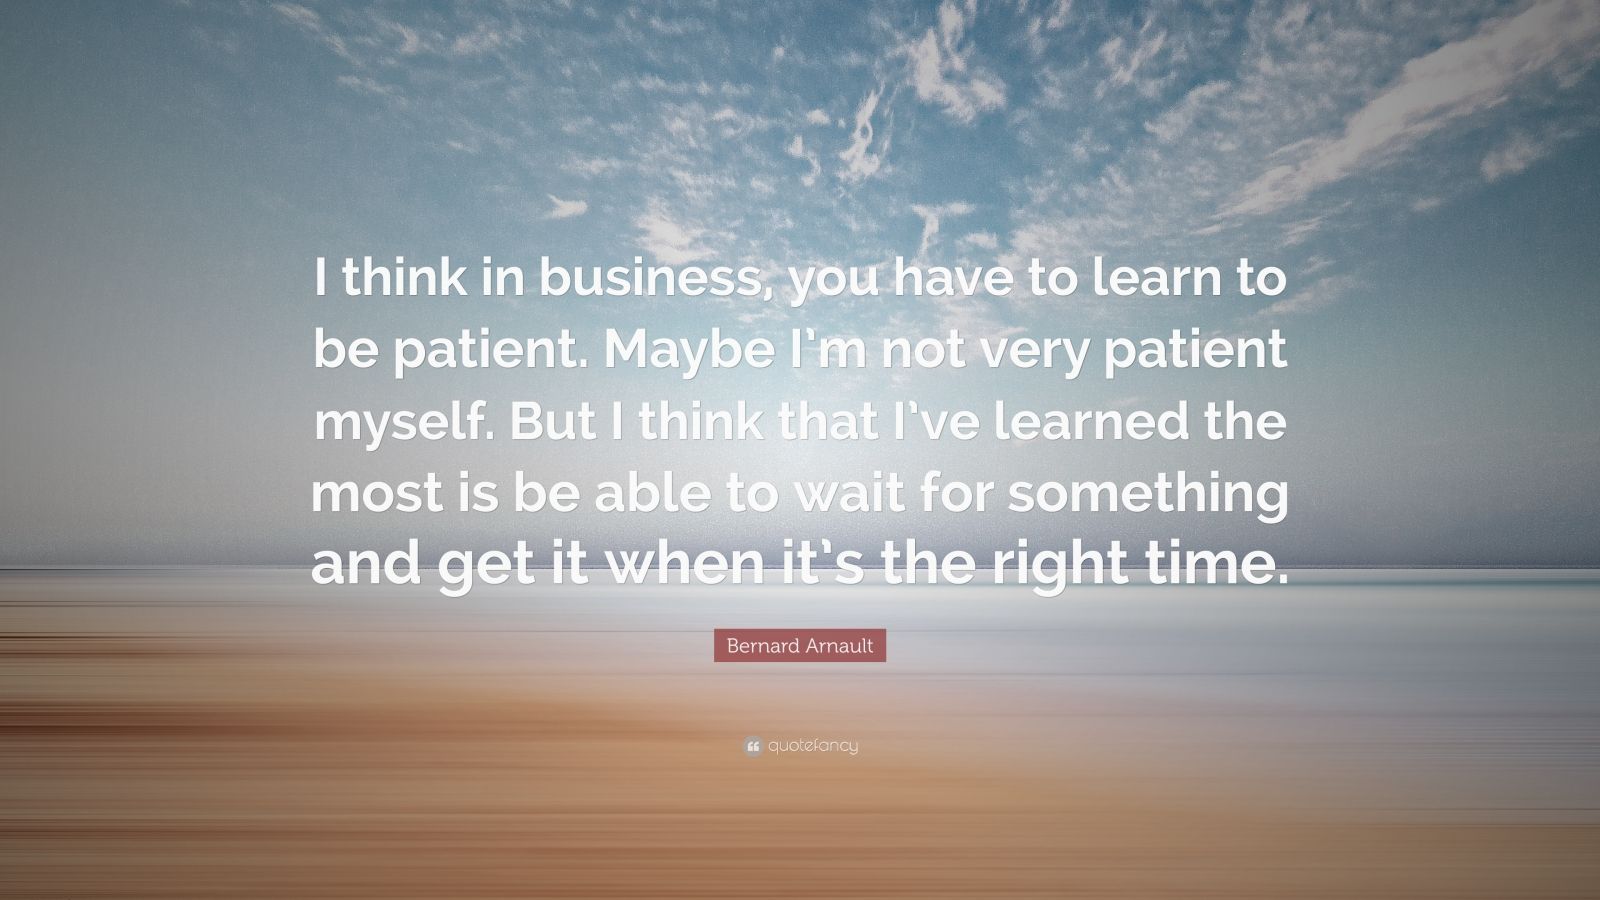 Bernard Arnault Quote: "I think in business, you have to ...